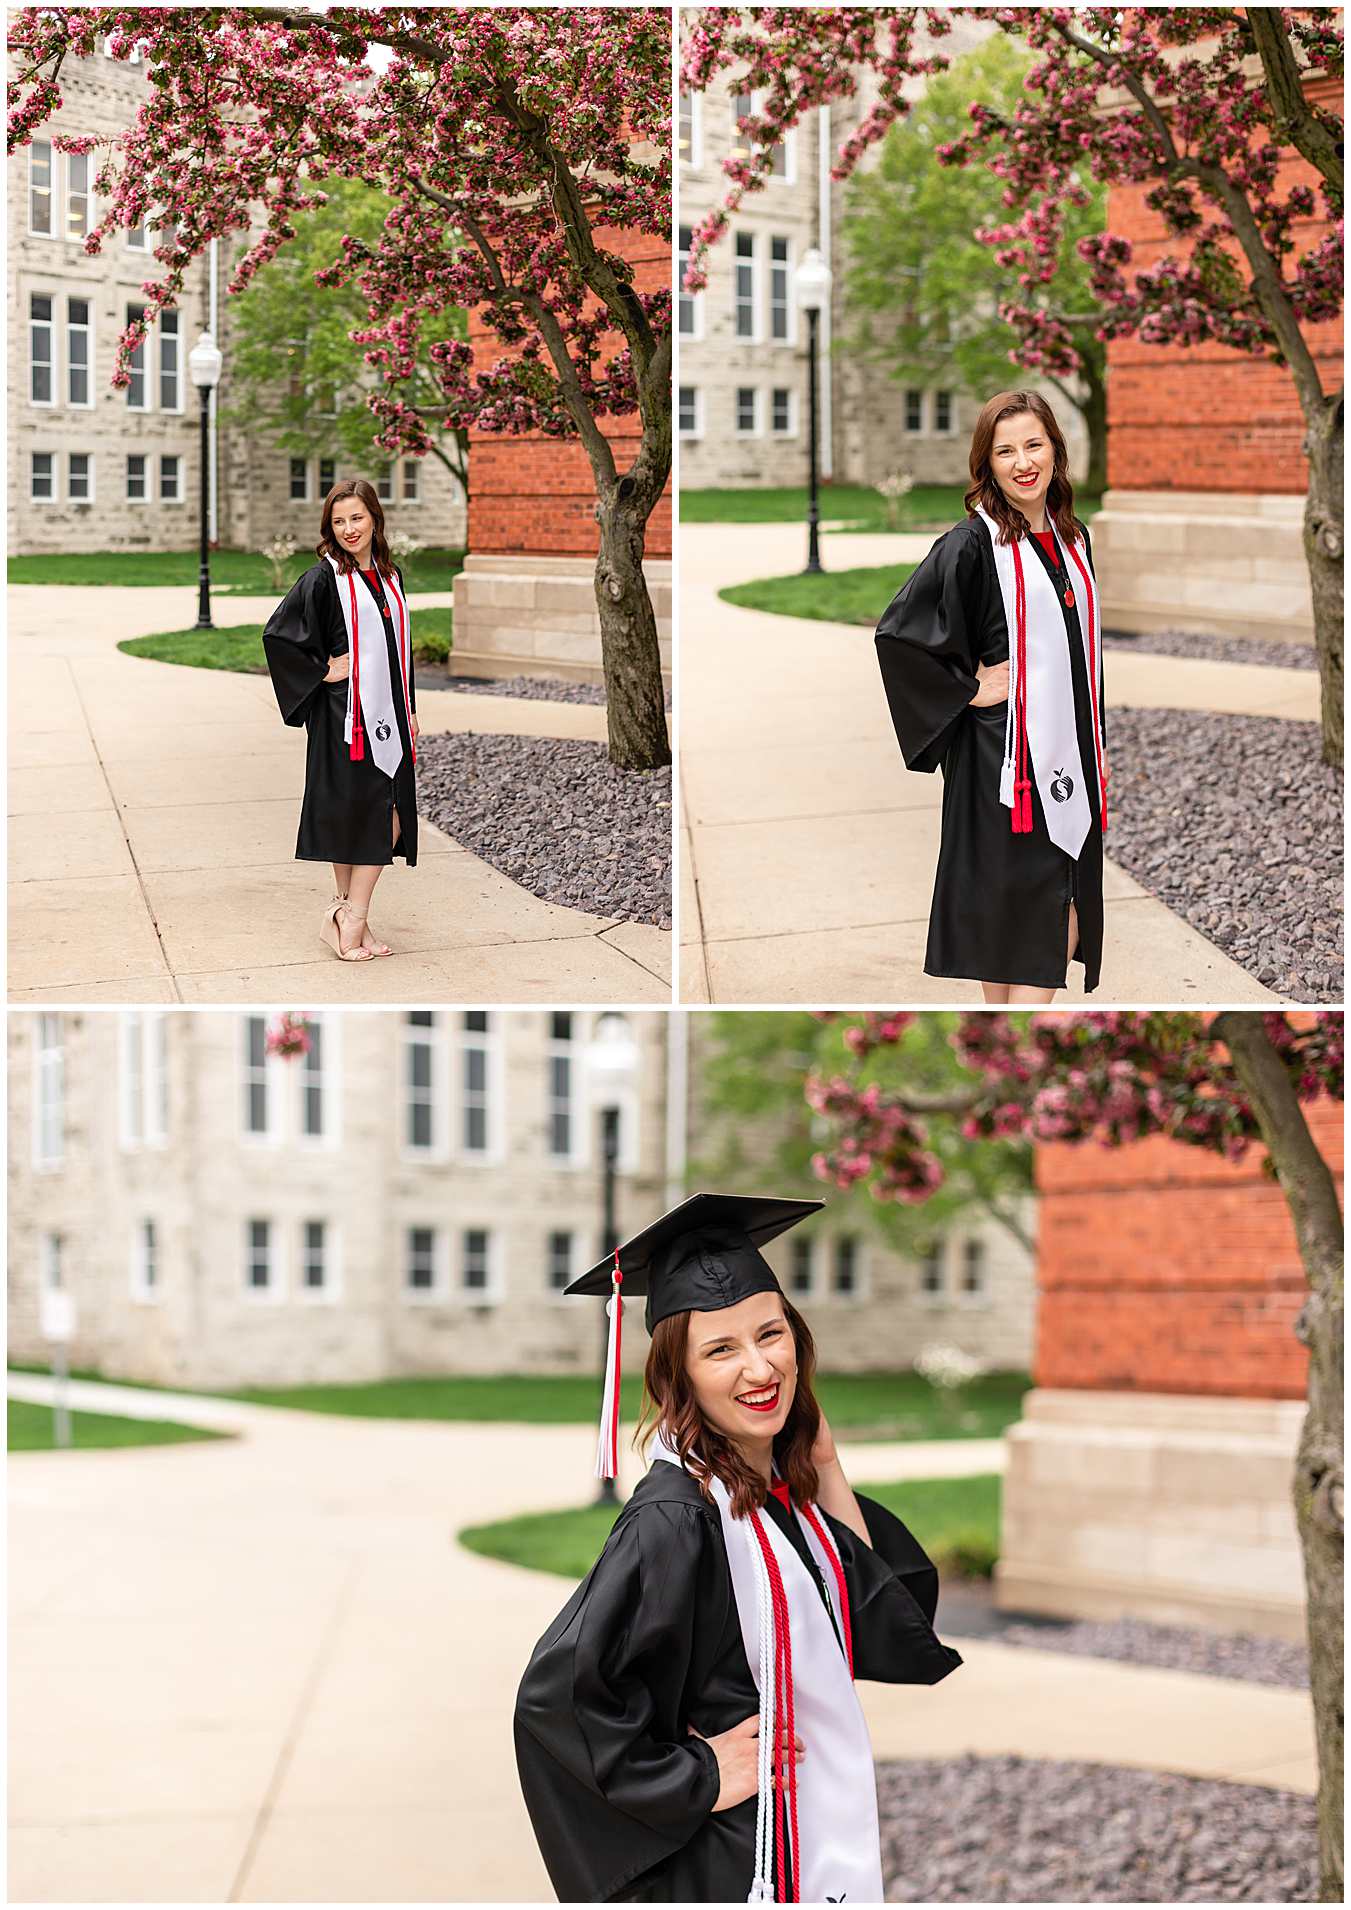 Graduation-Cap and Gown photos at Illinois State University in Normal, IL 